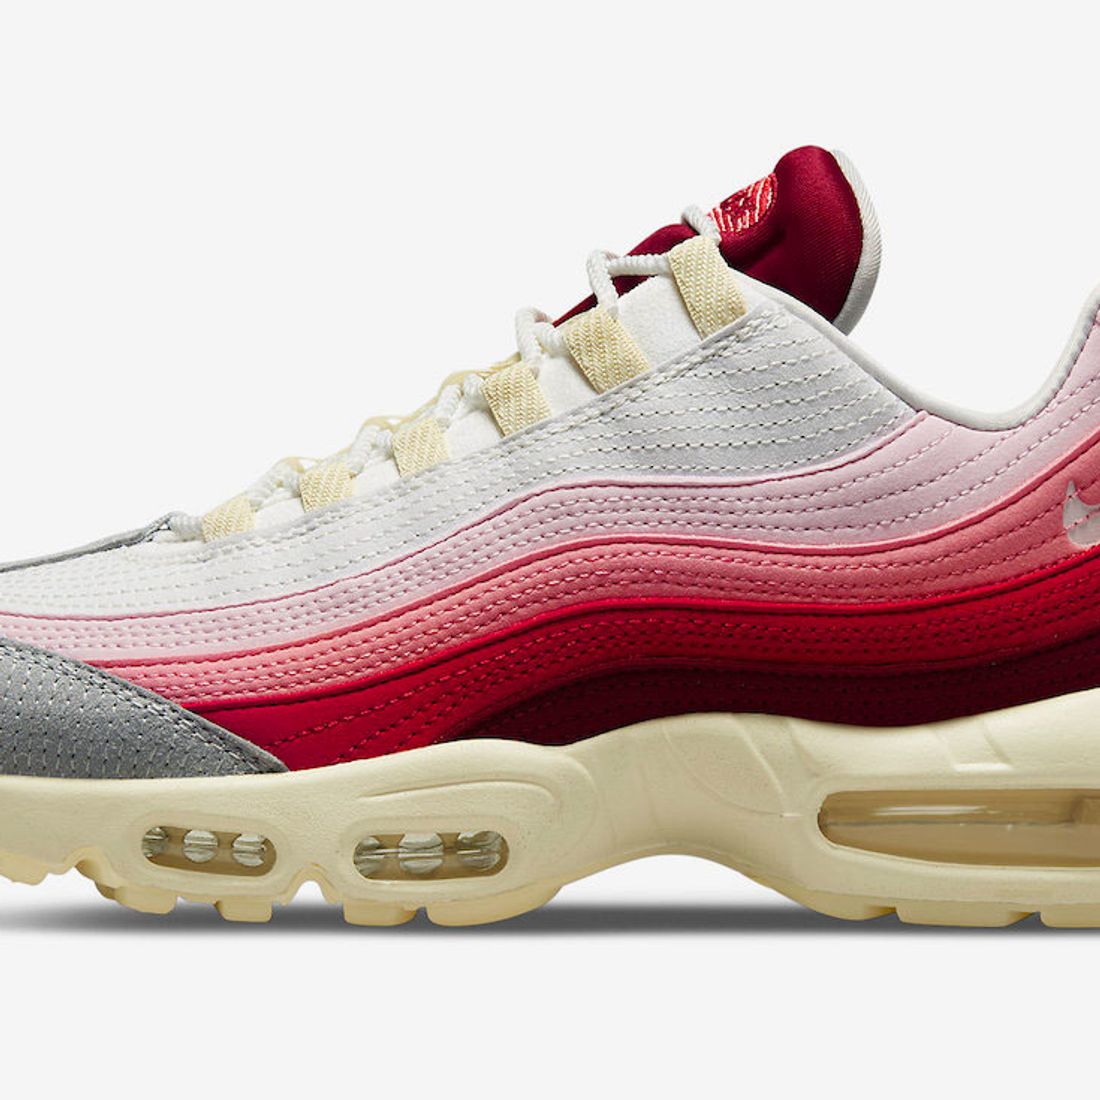 Nike Show Off the Air 95 'Anatomy of Air' - Freaker